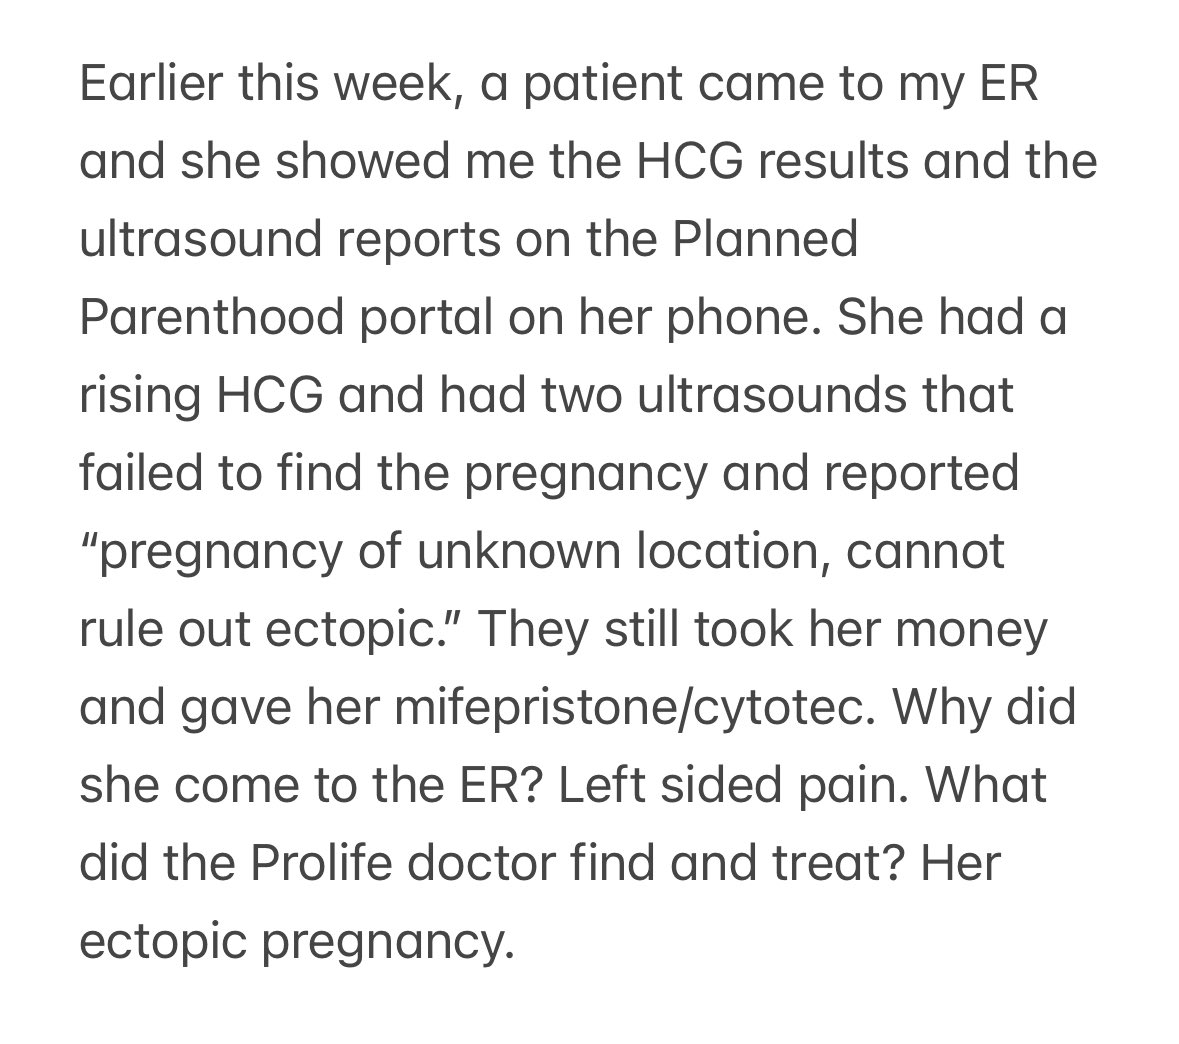 More abortion complications in the ER this week for the Prolife doctor to manage. @aaplog @HeartbeatIntl @sgruber91